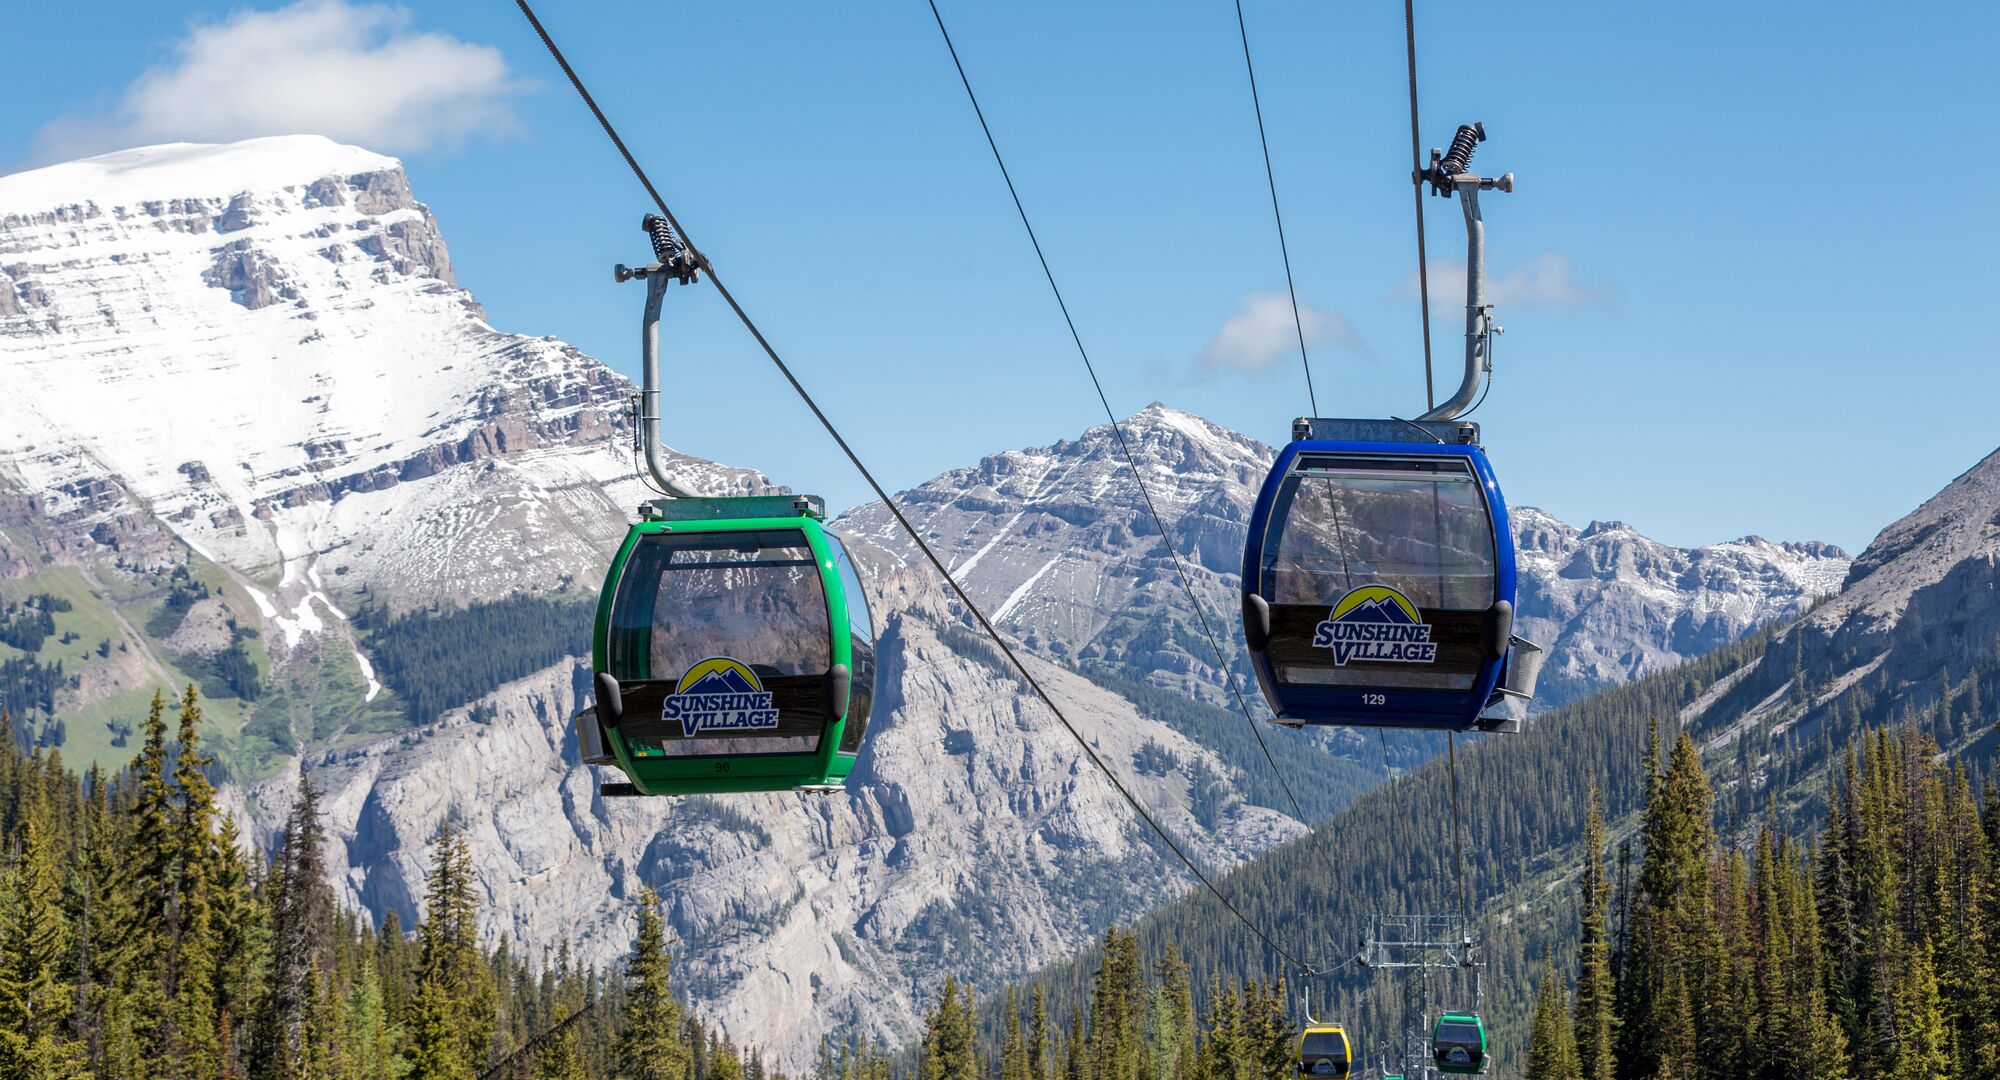 Gondola carts with mountains in the background at Sunshine Village in Banff National Park